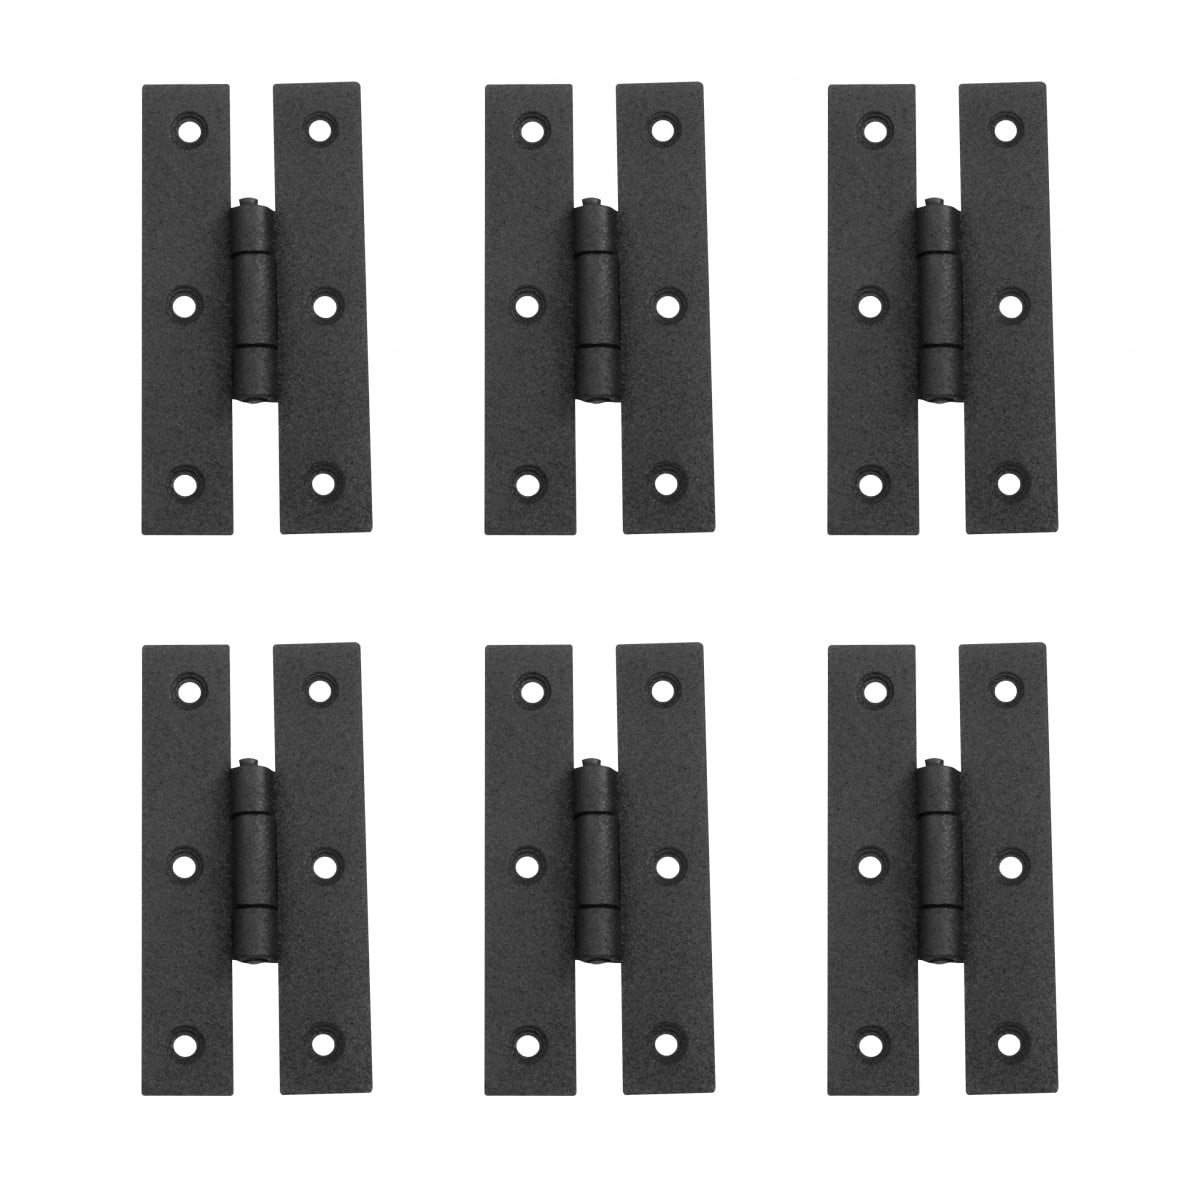 Right Hinge Hardware Hinge Compact Size Door Hinge Corrosion Resistance Antirust Upgraded Home and Office Equipment for Building Industrial Decoration Furniture 